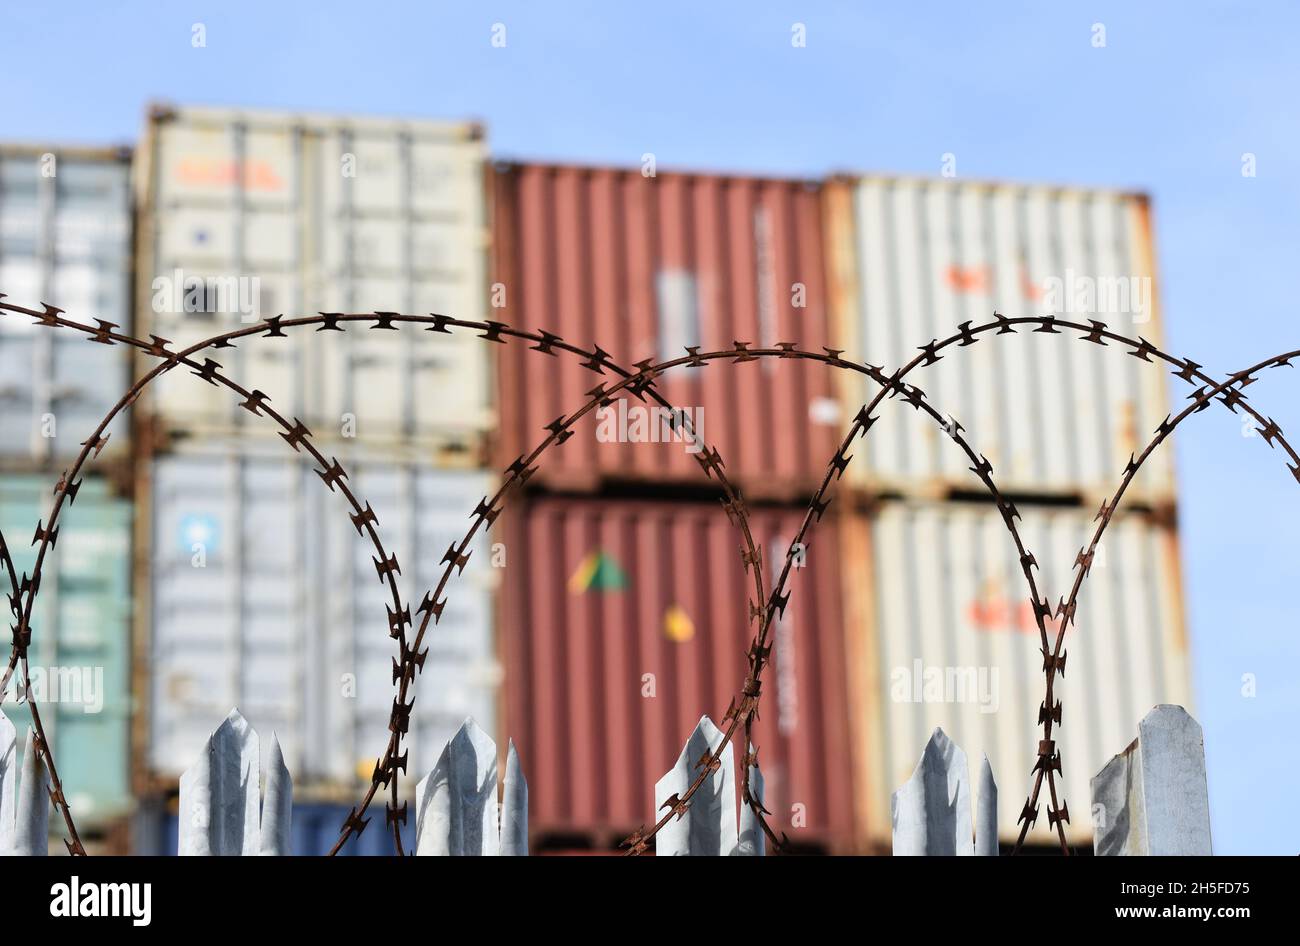 Freight shipping containers stacked high at a busy British port behind a fence topped with barbed razor wire which is the main focus. Stock Photo